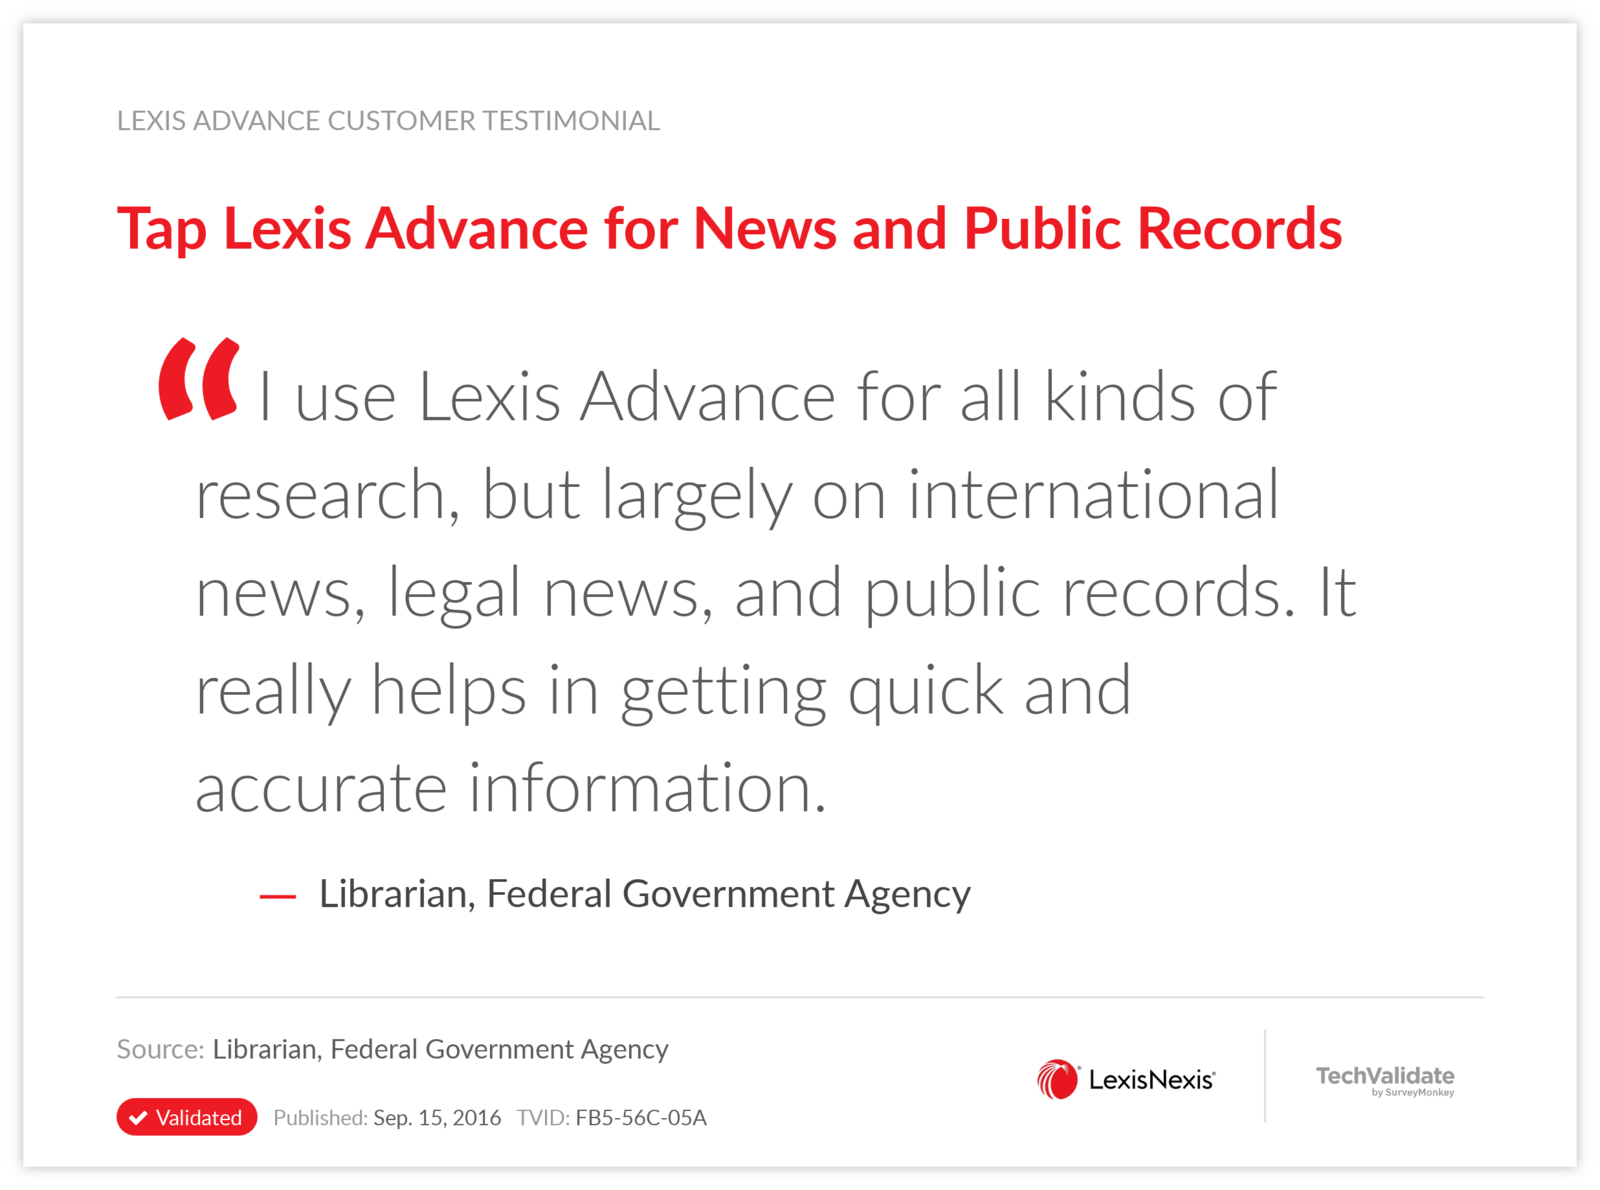 Tap Lexis Advance for News and Public Records